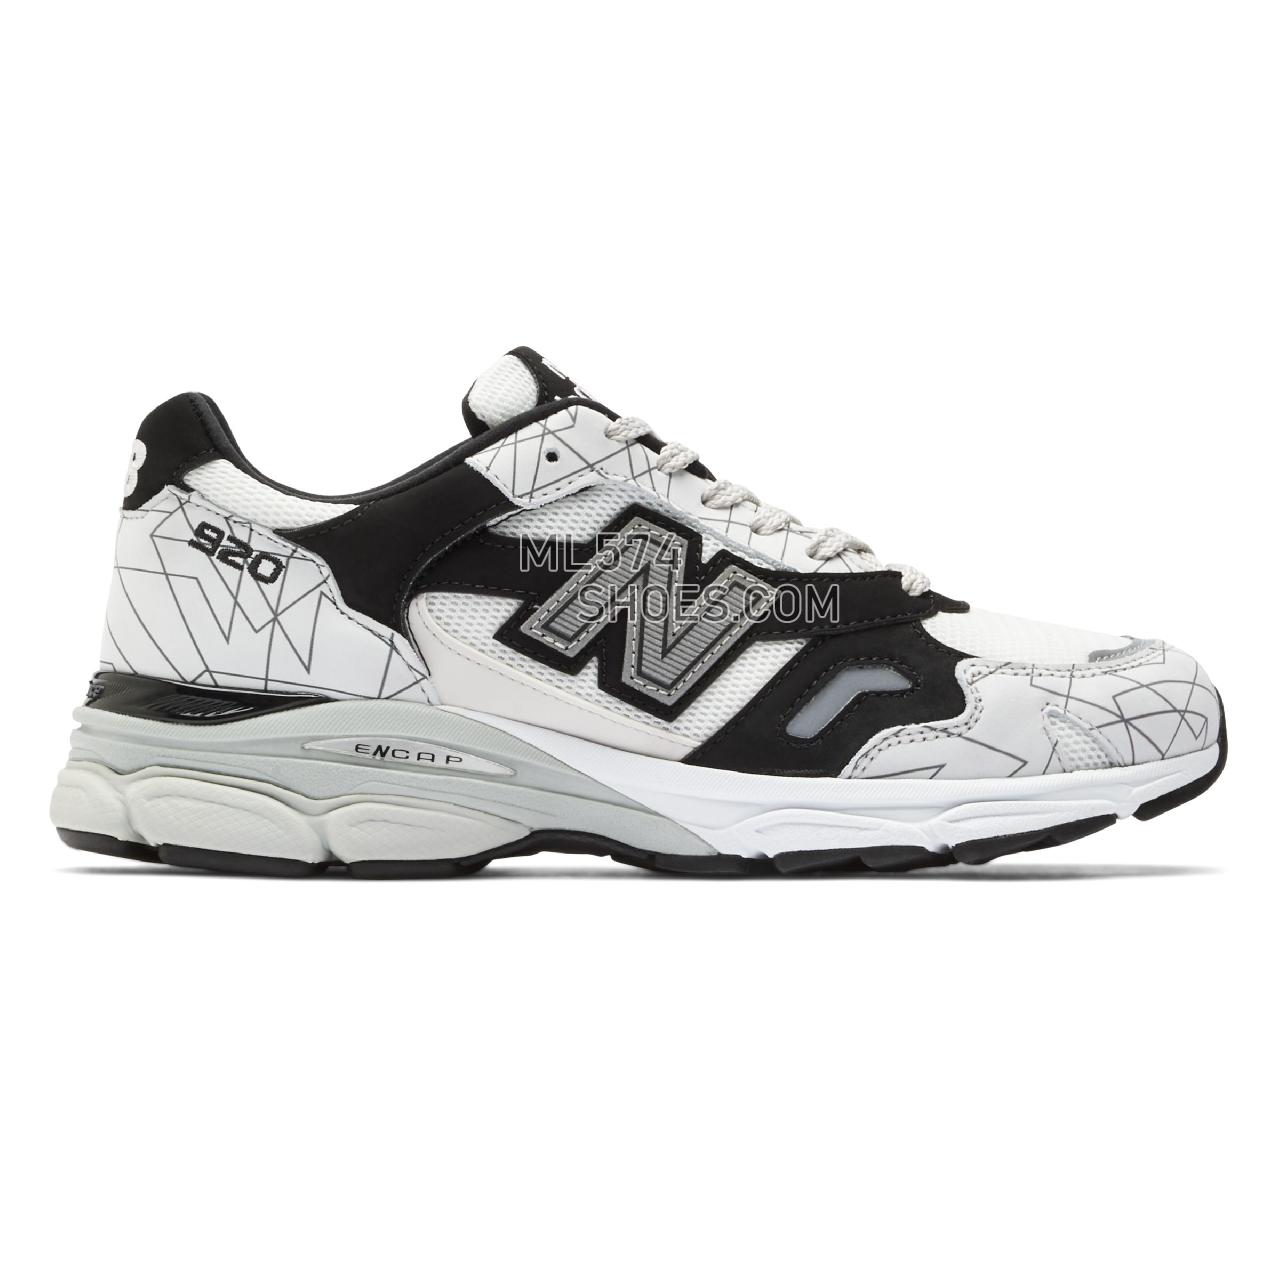 New Balance MADE in UK 920 - Men's Made in USA And UK Sneakers - Pale Gray with Black and White - M920PNU